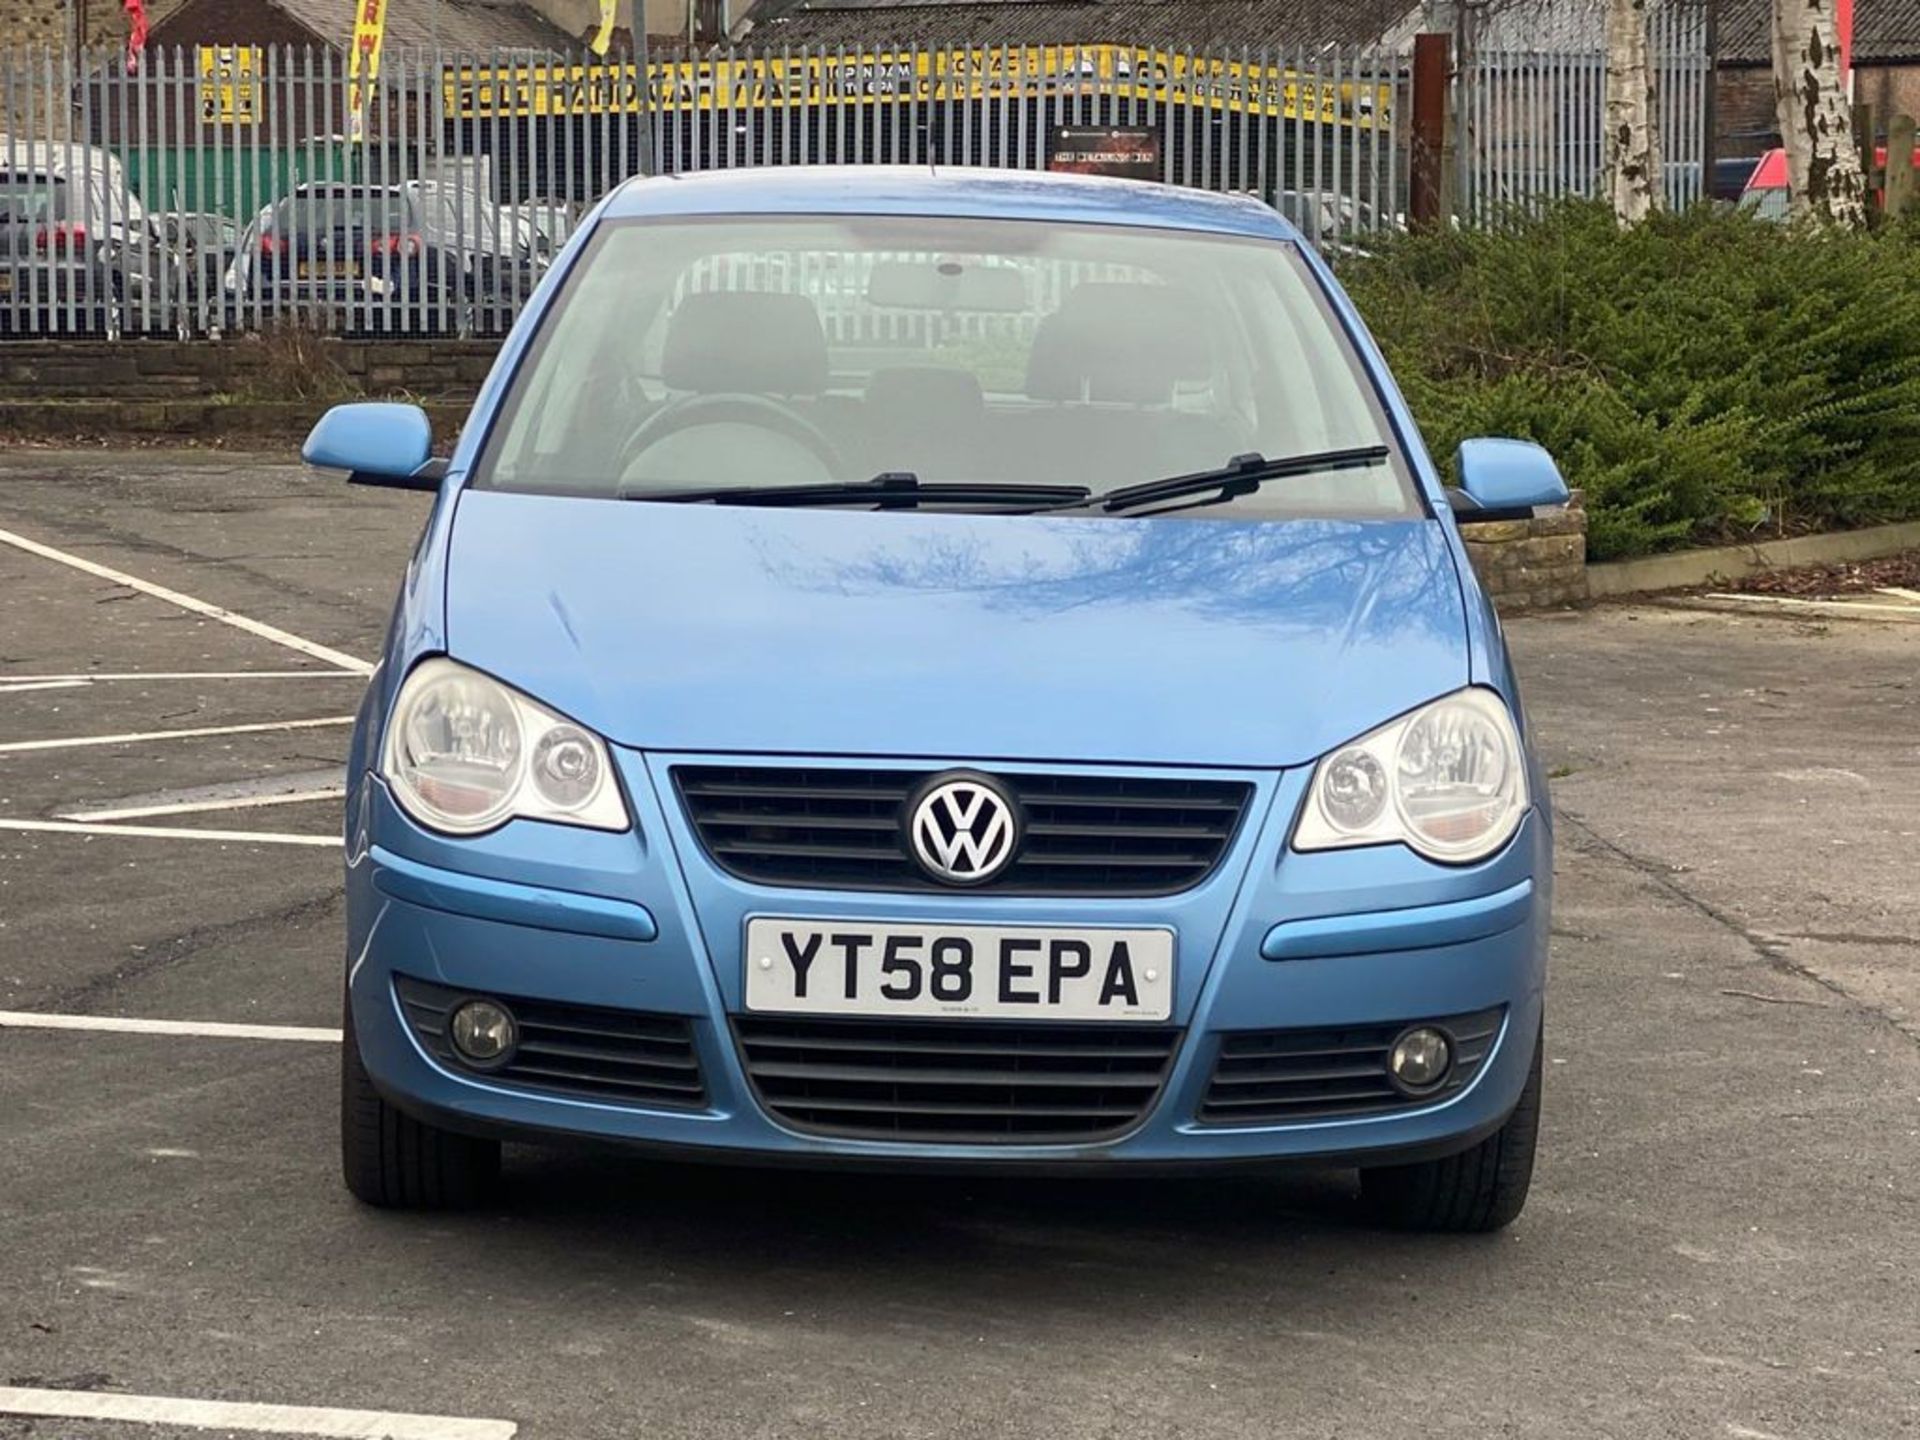 VOLKSWAGEN POLO 1.2 MATCH 5DR 2008 (58 REG) - Image 18 of 21